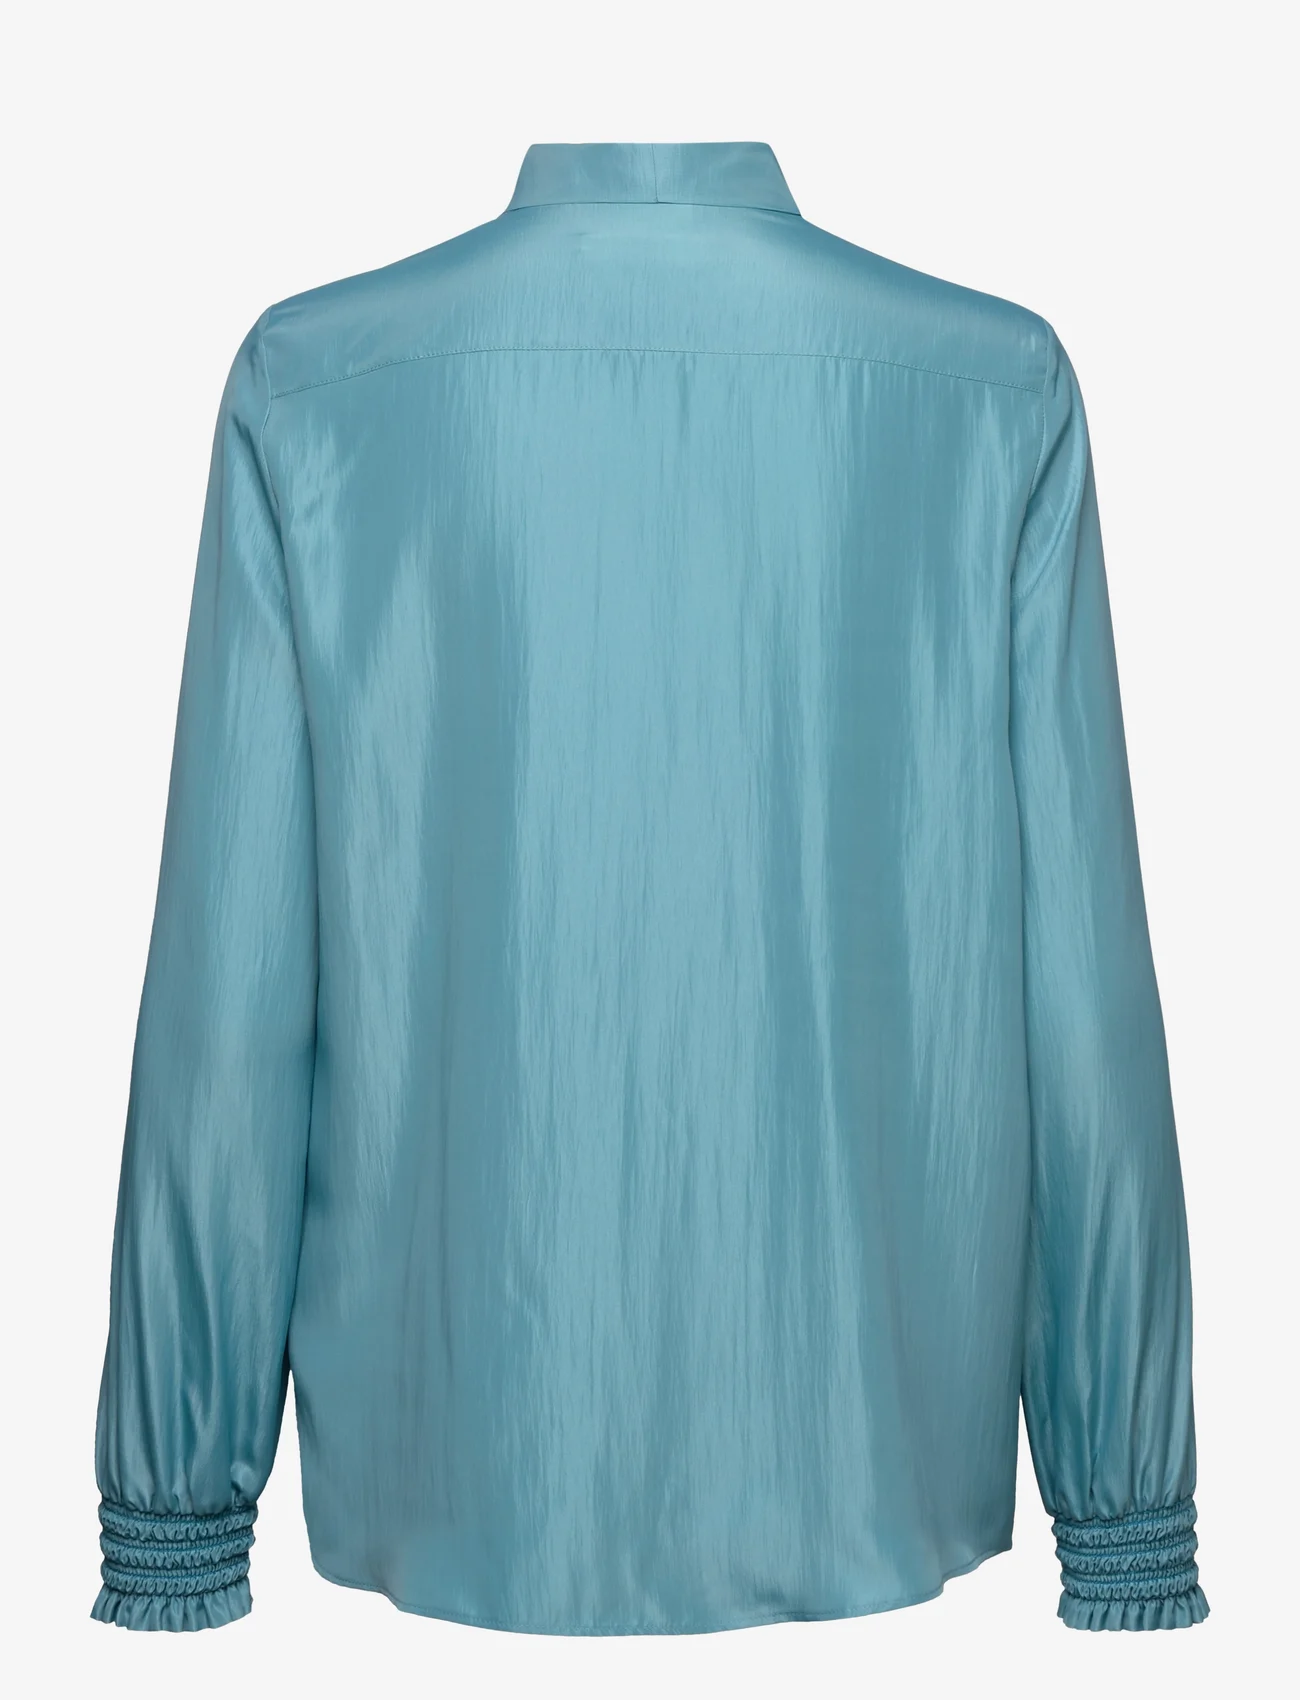 Boutique Moschino - Blouse - long-sleeved blouses - blue - 1